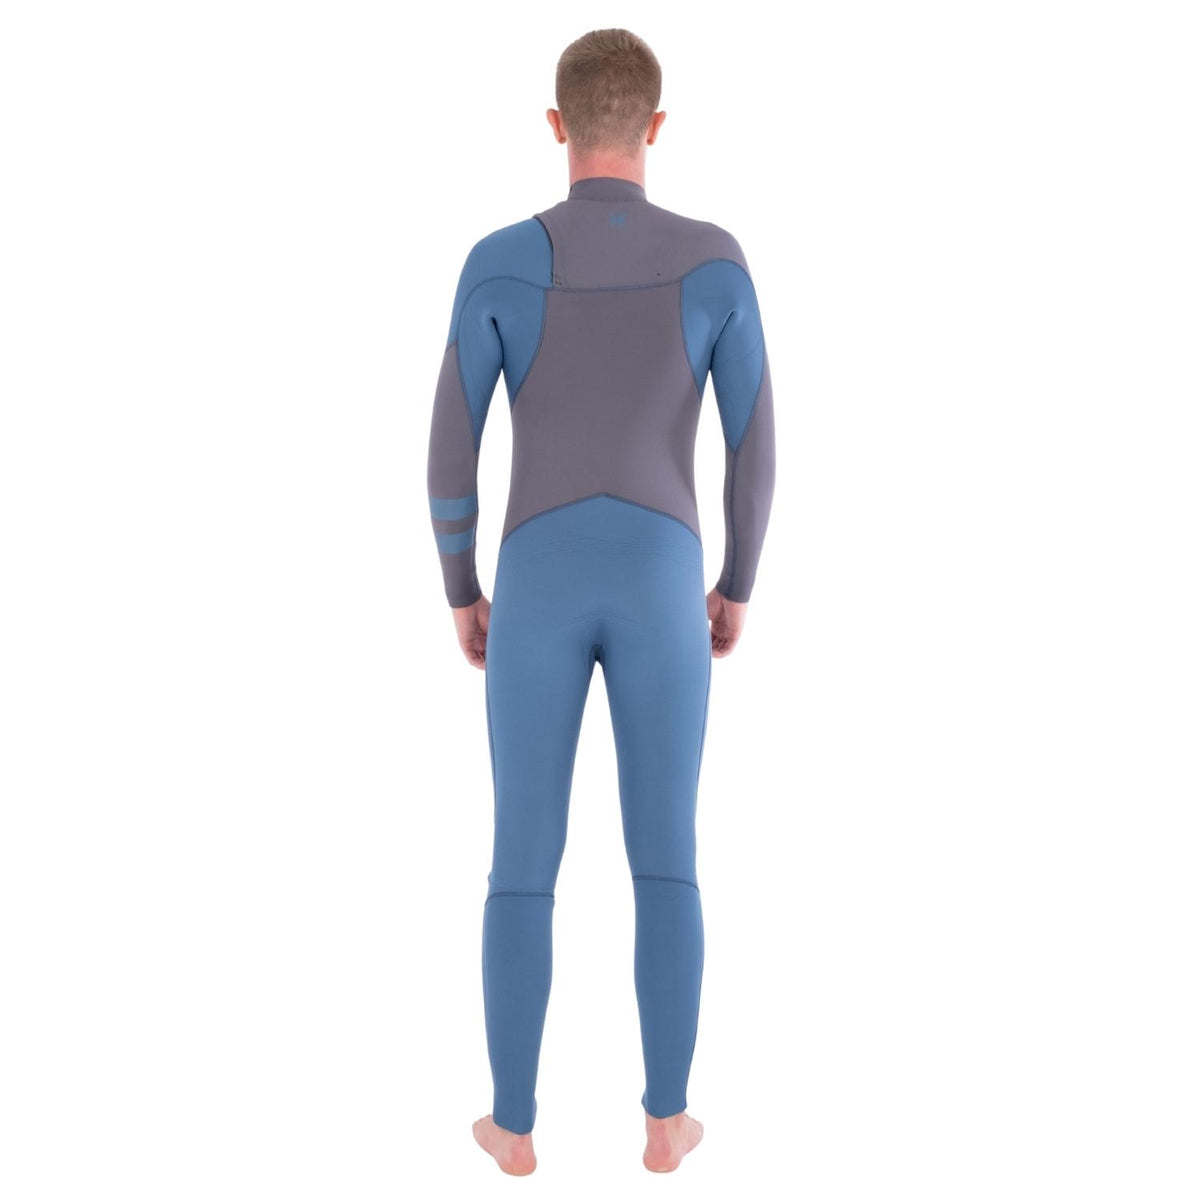 Hurley 5/3 Advantage Plus Chest Zip Full Wetsuit - Copen Blue - Mens Full Length Wetsuit by Hurley